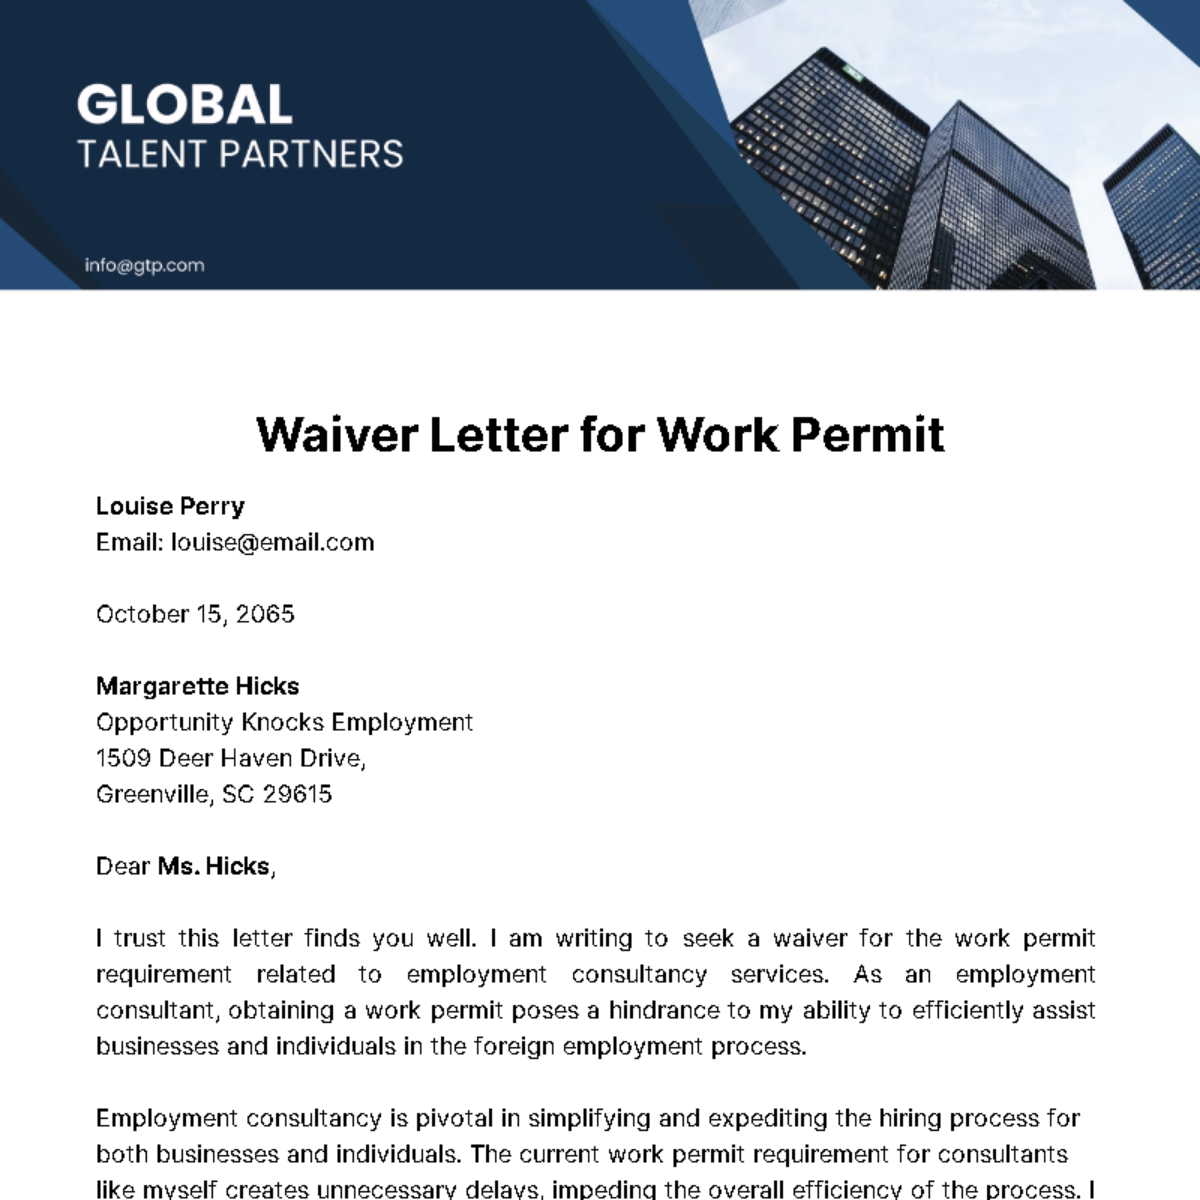 Waiver Letter for Work Permit Template